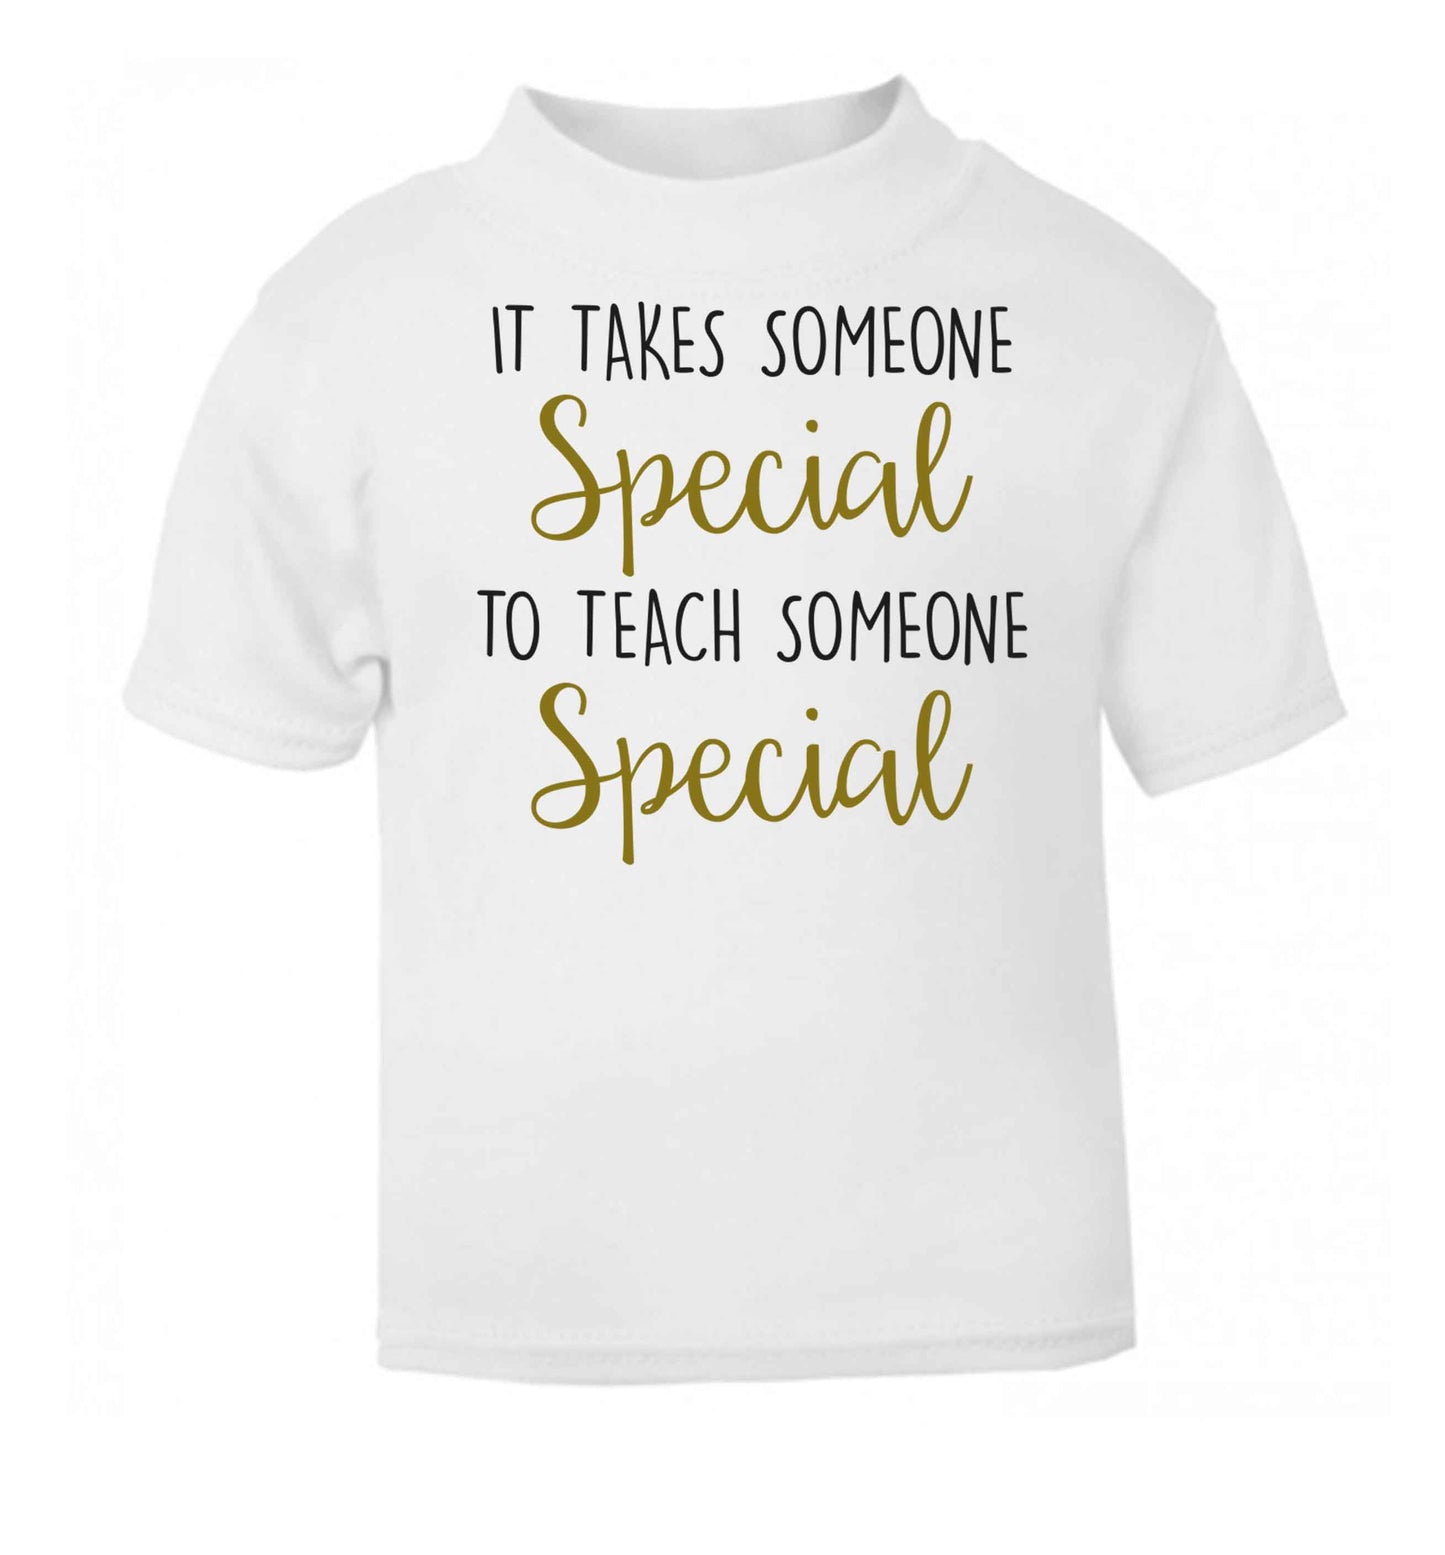 It takes someone special to teach someone special white baby toddler Tshirt 2 Years